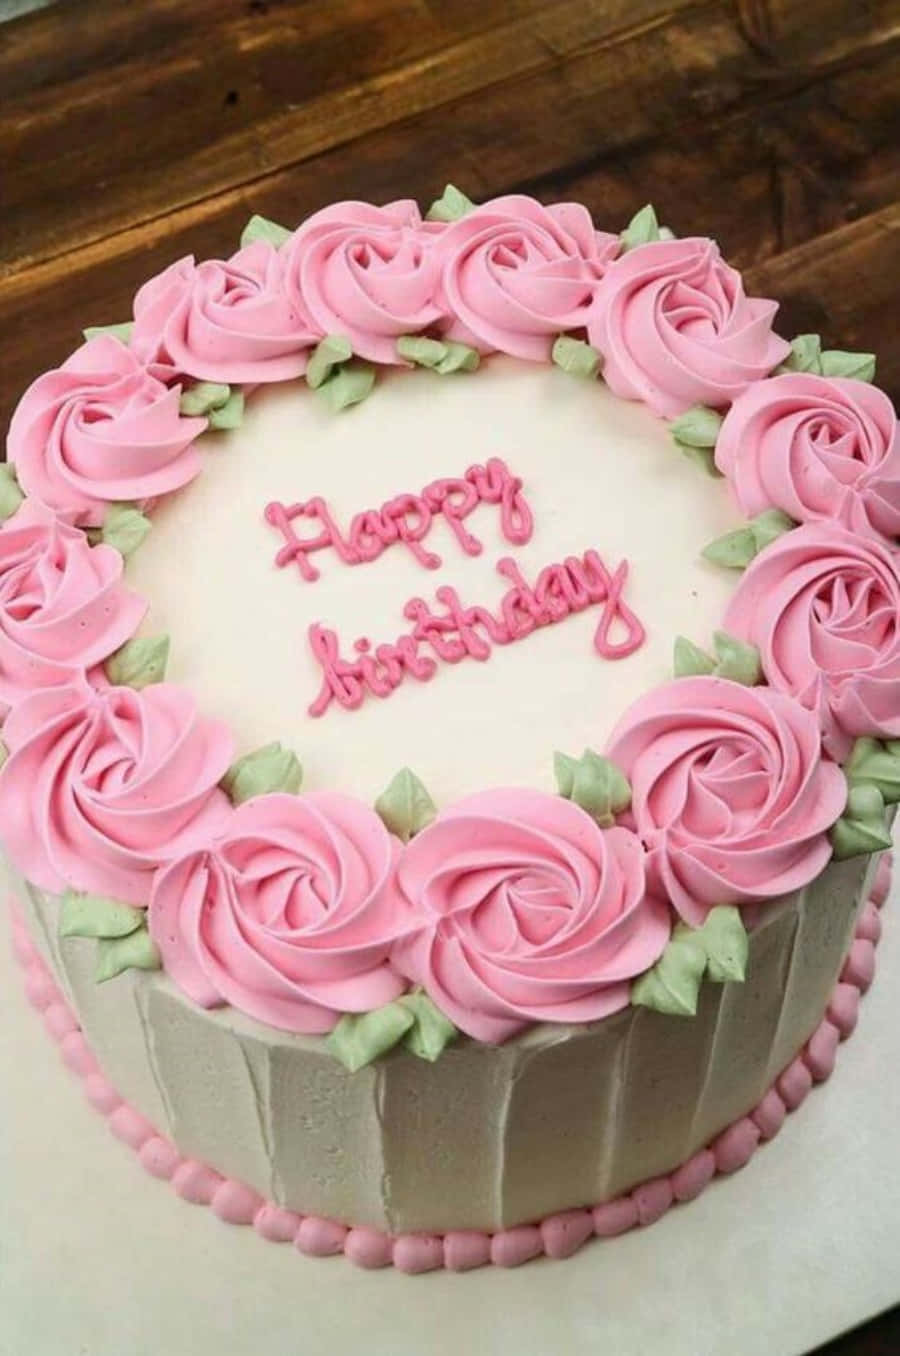 Delicious and Colorful Happy Birthday Cake